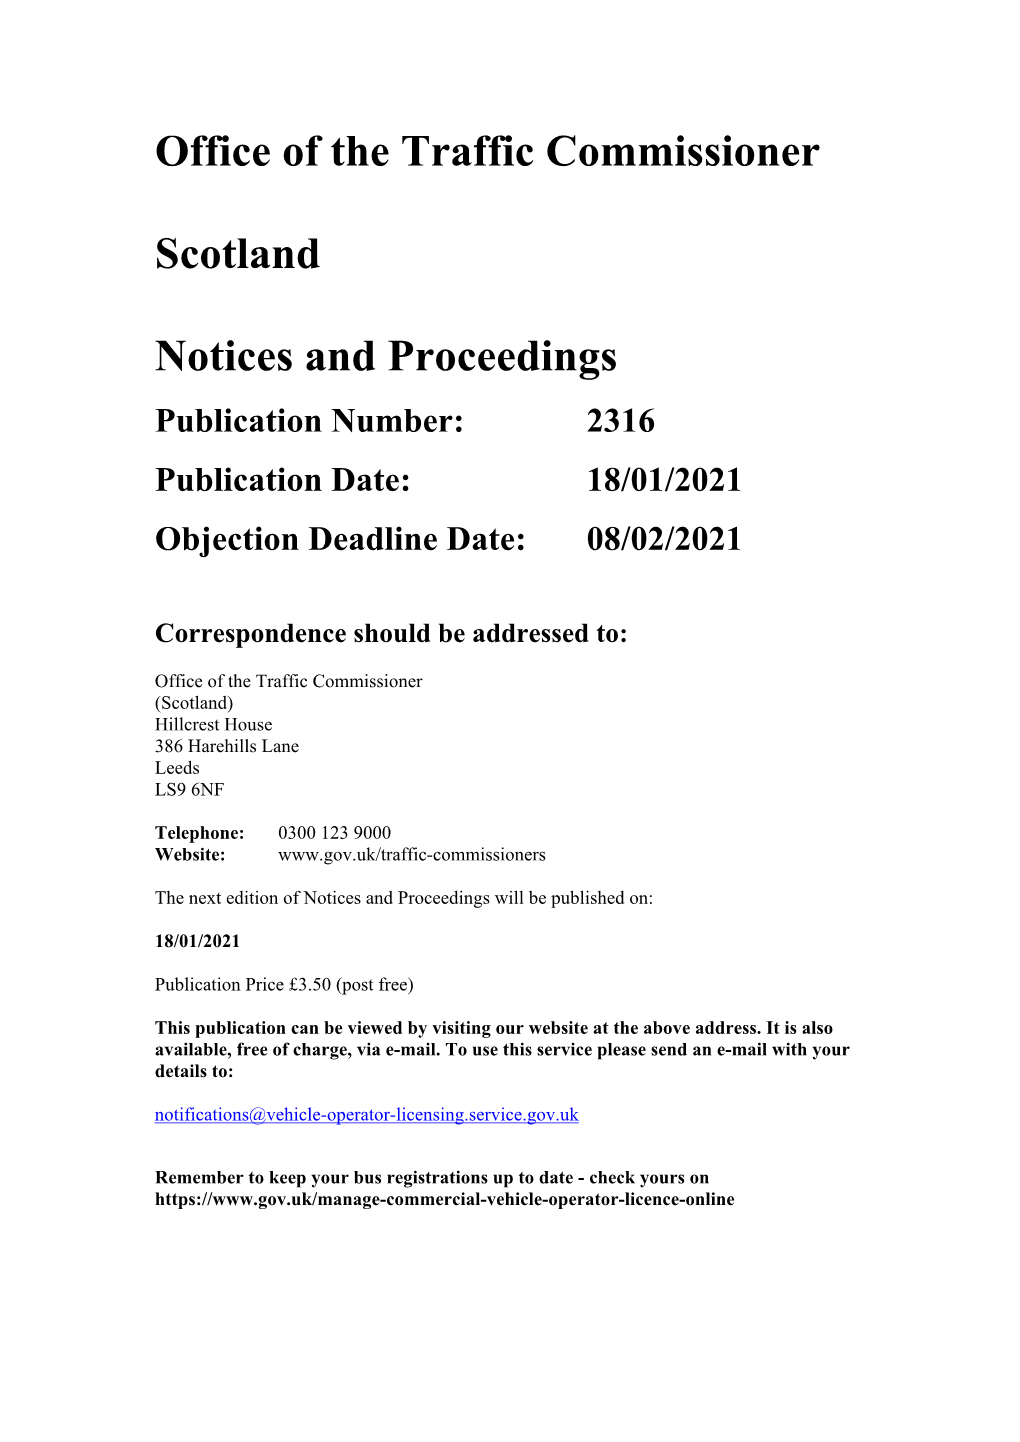 Notices and Proceedings for Scotland 2316